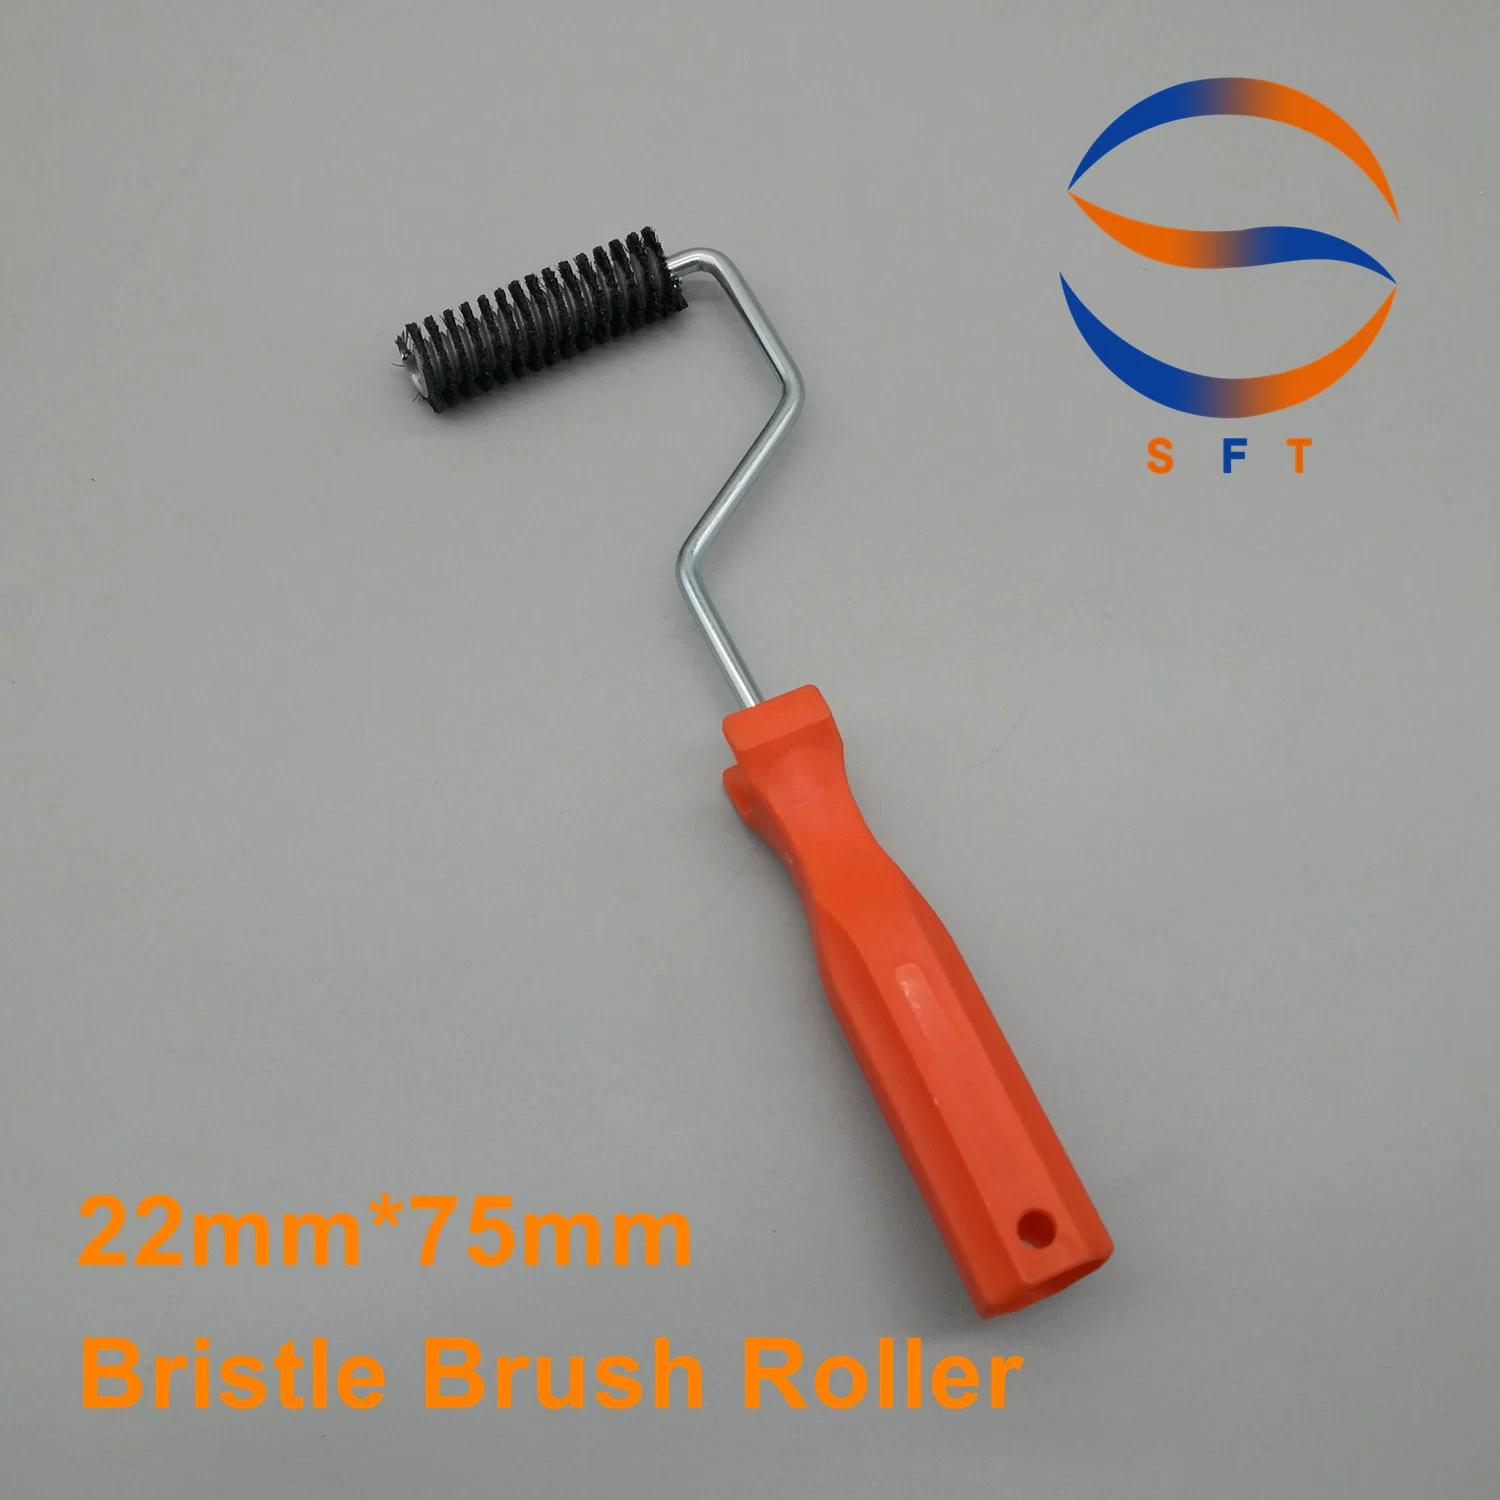 22mm Bristle Brush Rollers with Pure Pig Hair for Laminating